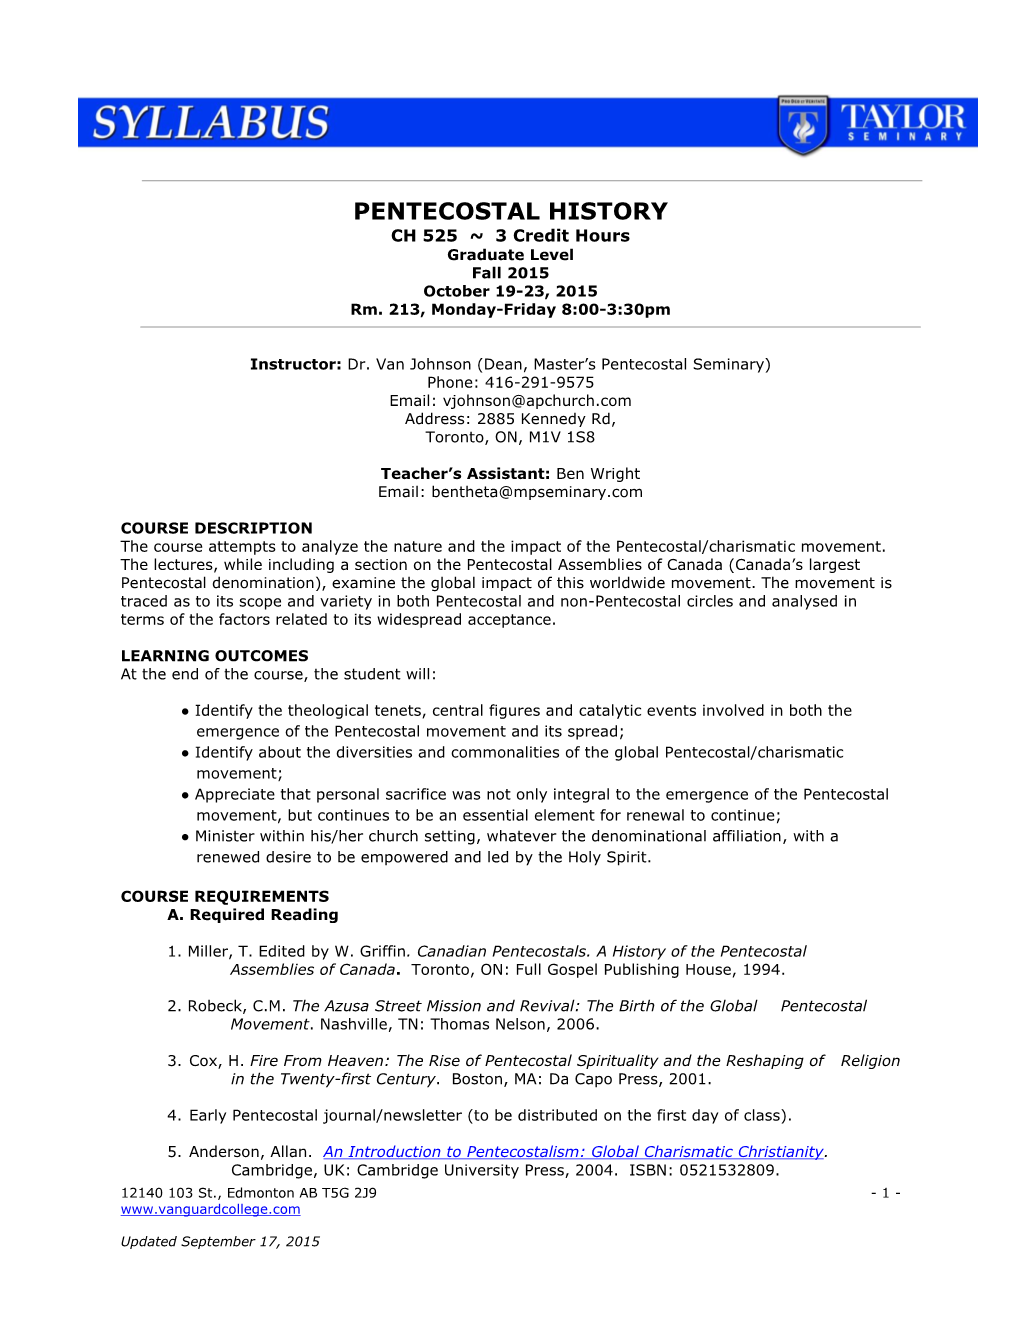 PENTECOSTAL HISTORY CH 525 ~ 3 Credit Hours Graduate Level Fall 2015 October 19-23, 2015 Rm